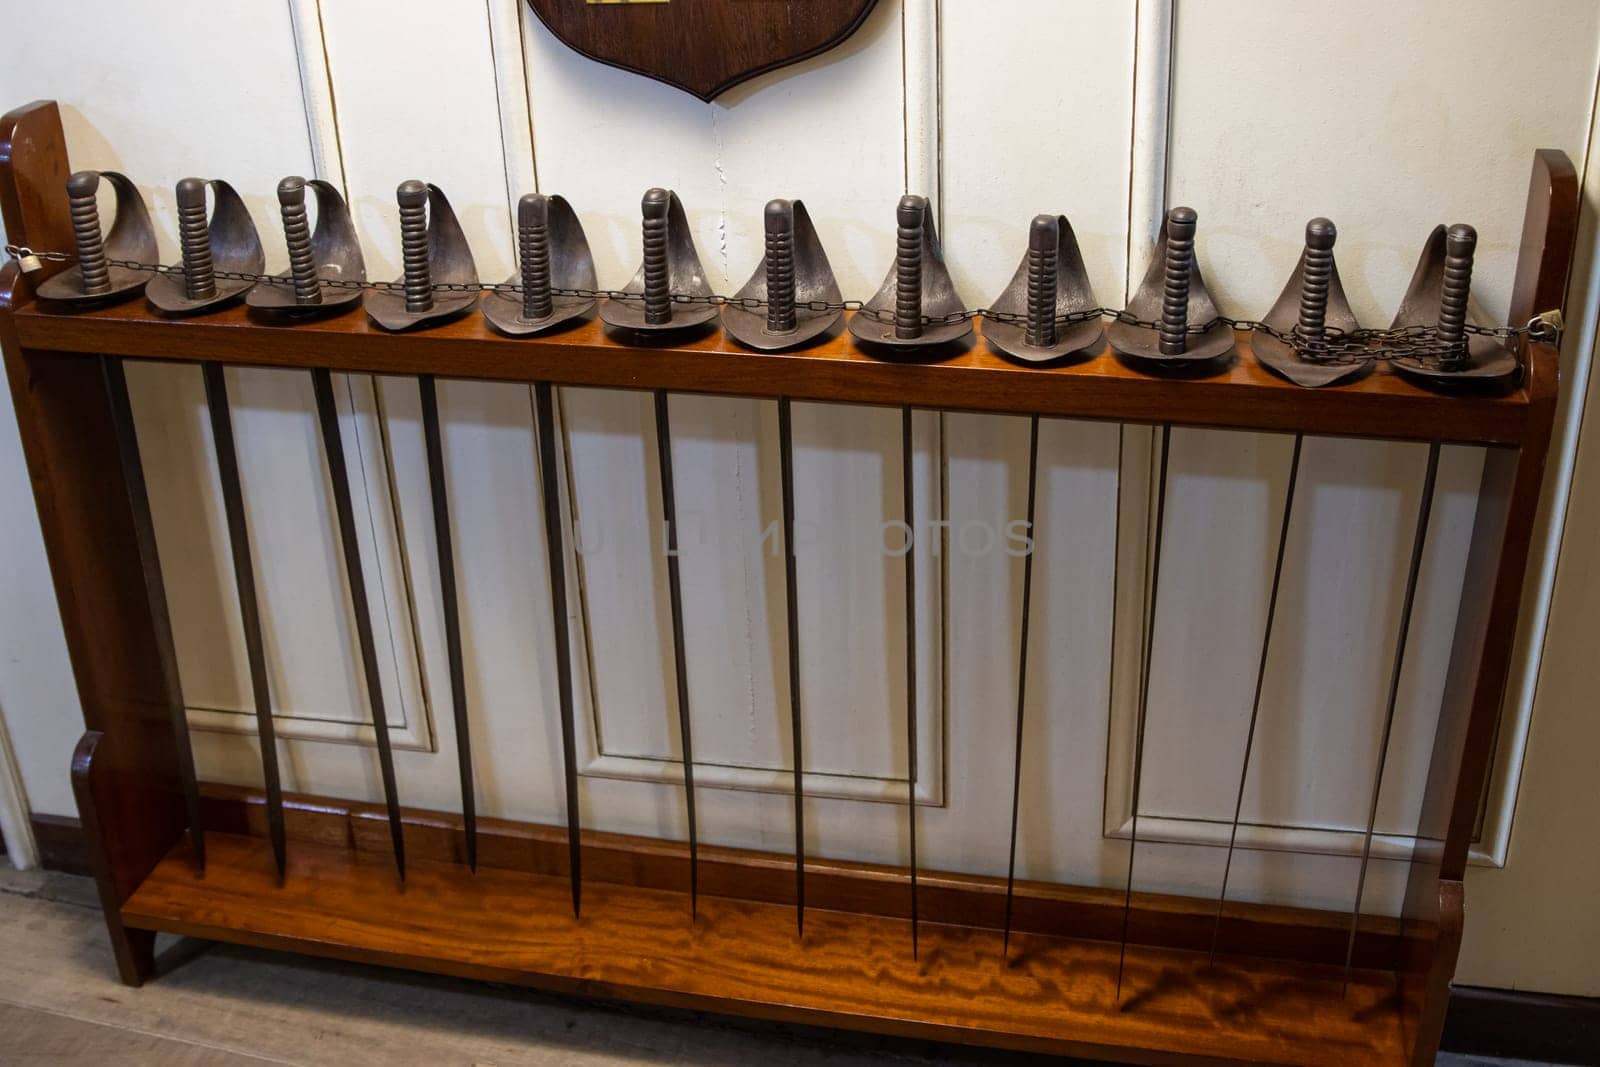 Many rapiers in the row - battle swords on the warship of 18 century - sailors soldiers, inside ship